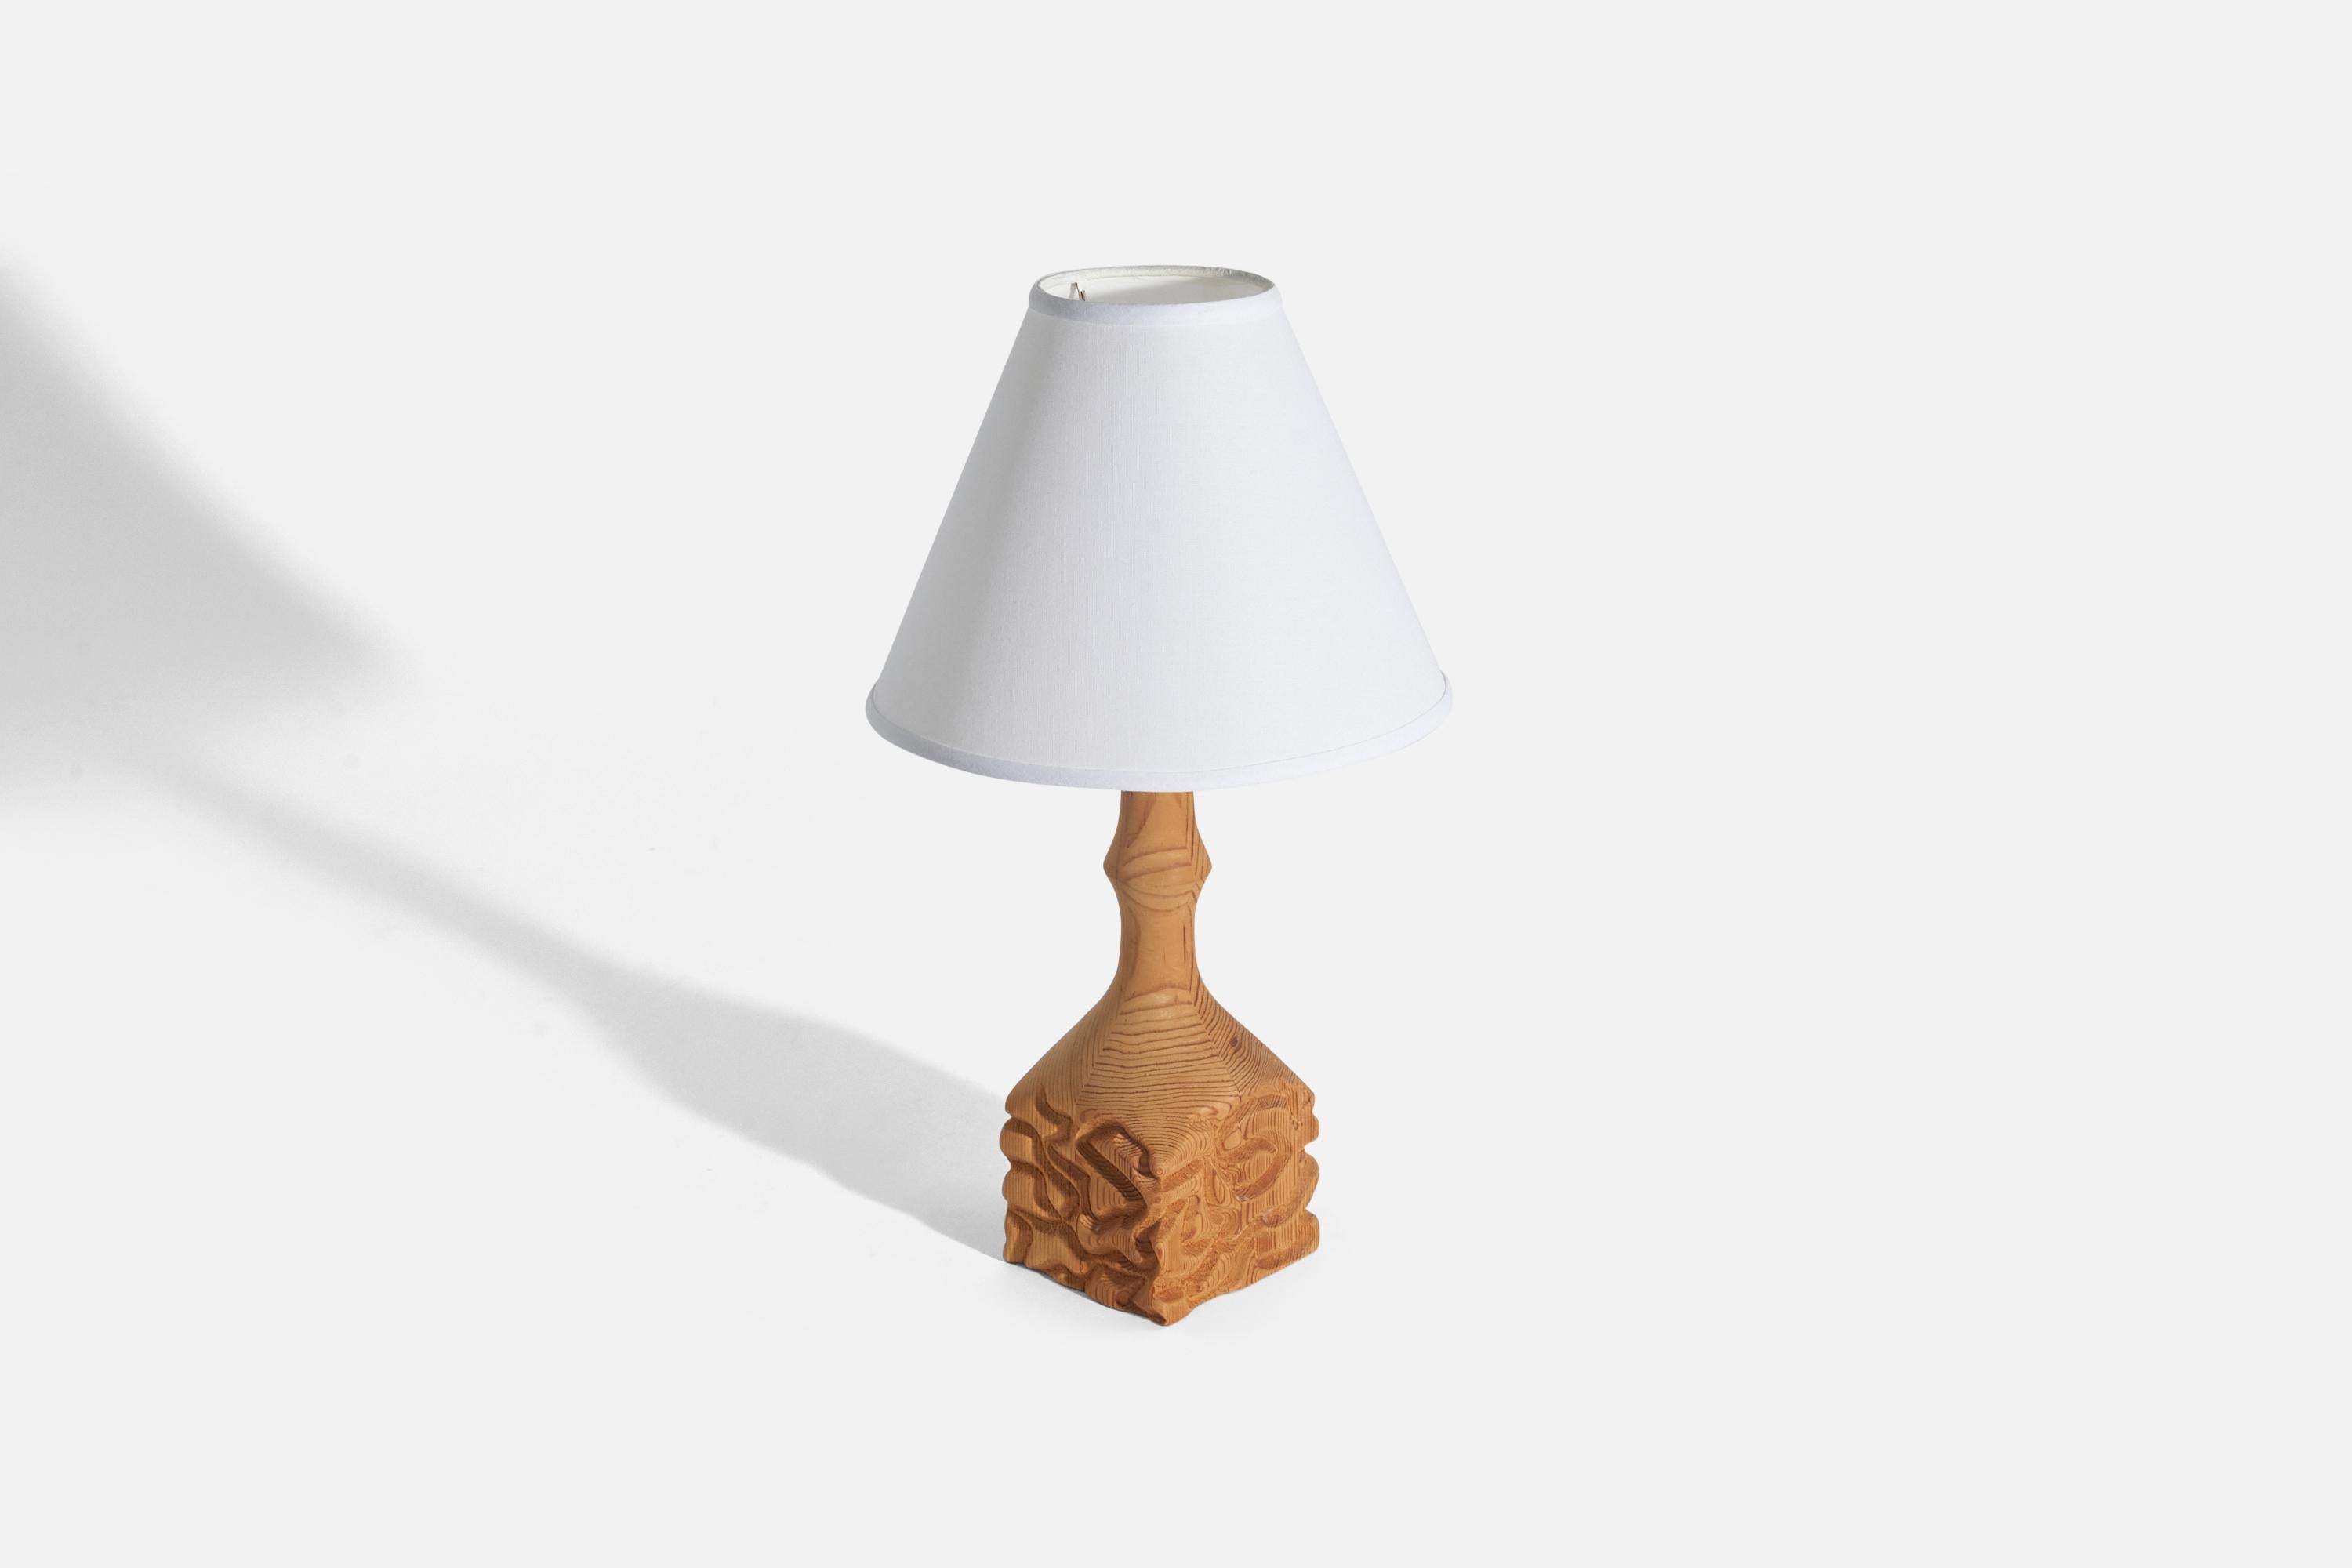 A pine table lamp designed and produced in Sweden, 1970s.

Sold without Lampshade(s)
Dimensions of Lamp (inches) : 13.62 x 4.24 x 4.07 (Height x Width x Depth)
Dimensions of Shade (inches) : 4 x 10 x 8 (Top Diameter x Bottom Diameter x